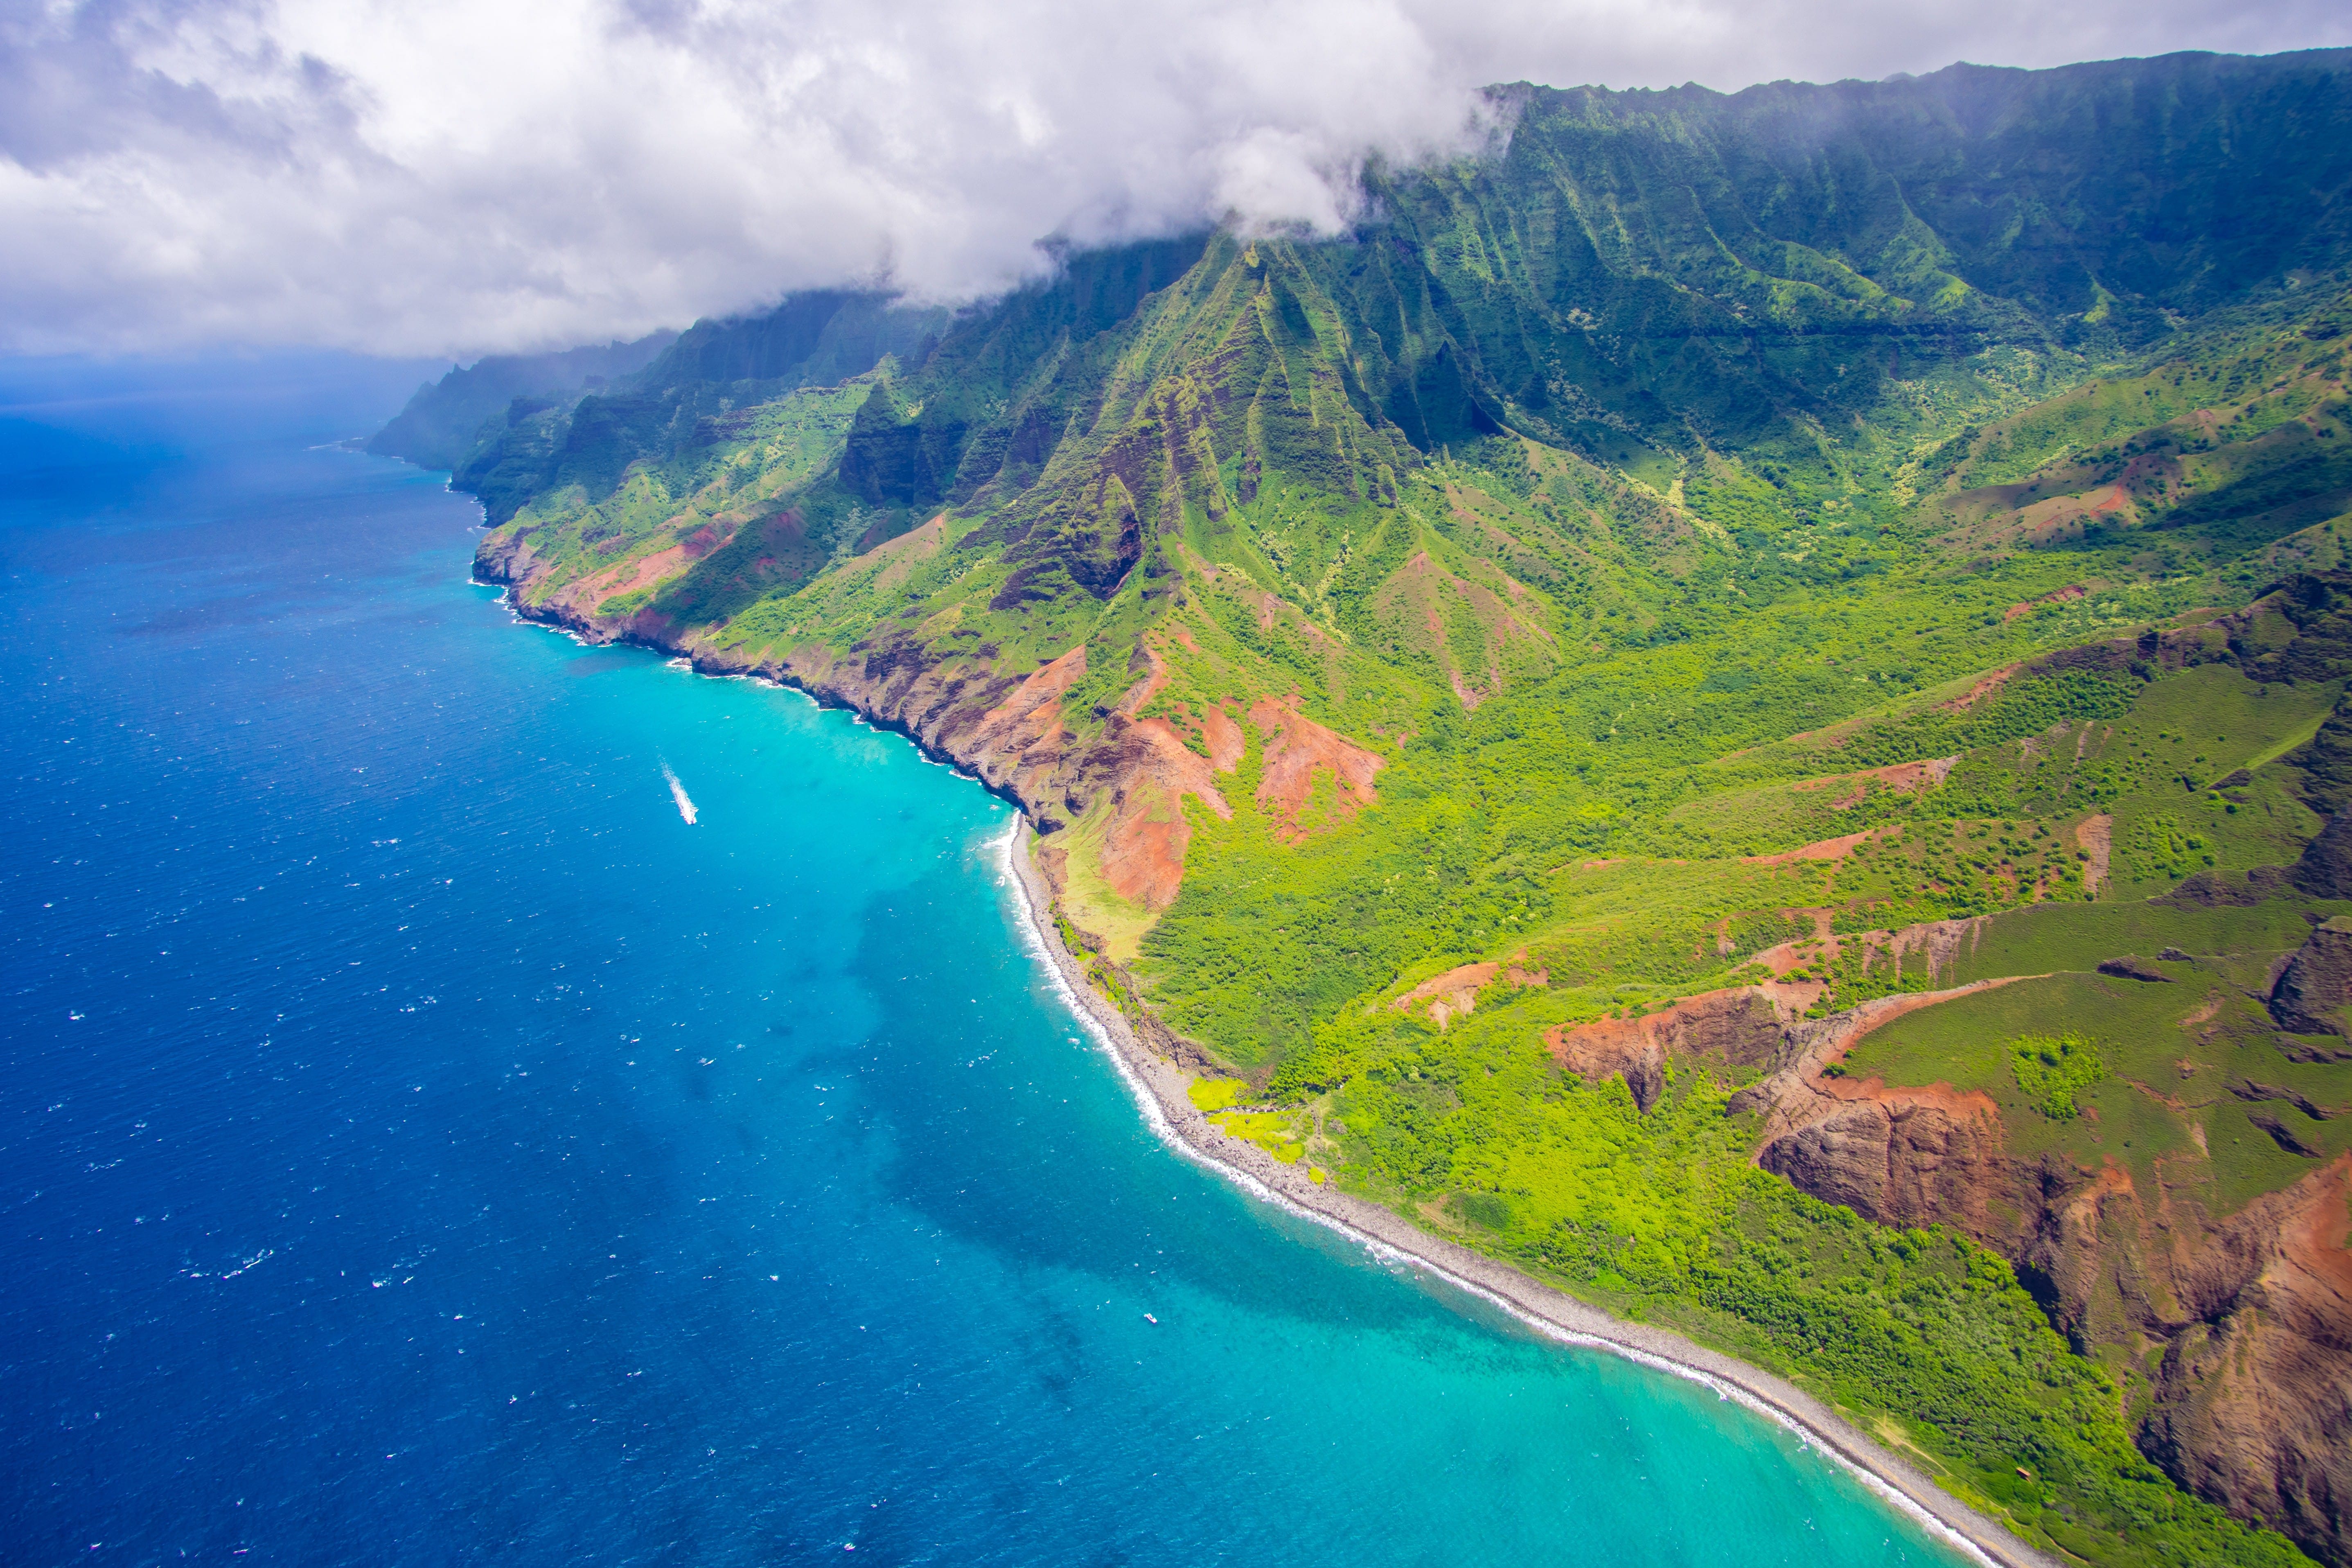 Behold the majestic green cliffs of Hawaii, where nature's artistry unfolds in vibrant hues. Plan your Hawaiian getaway with DREW Travel.